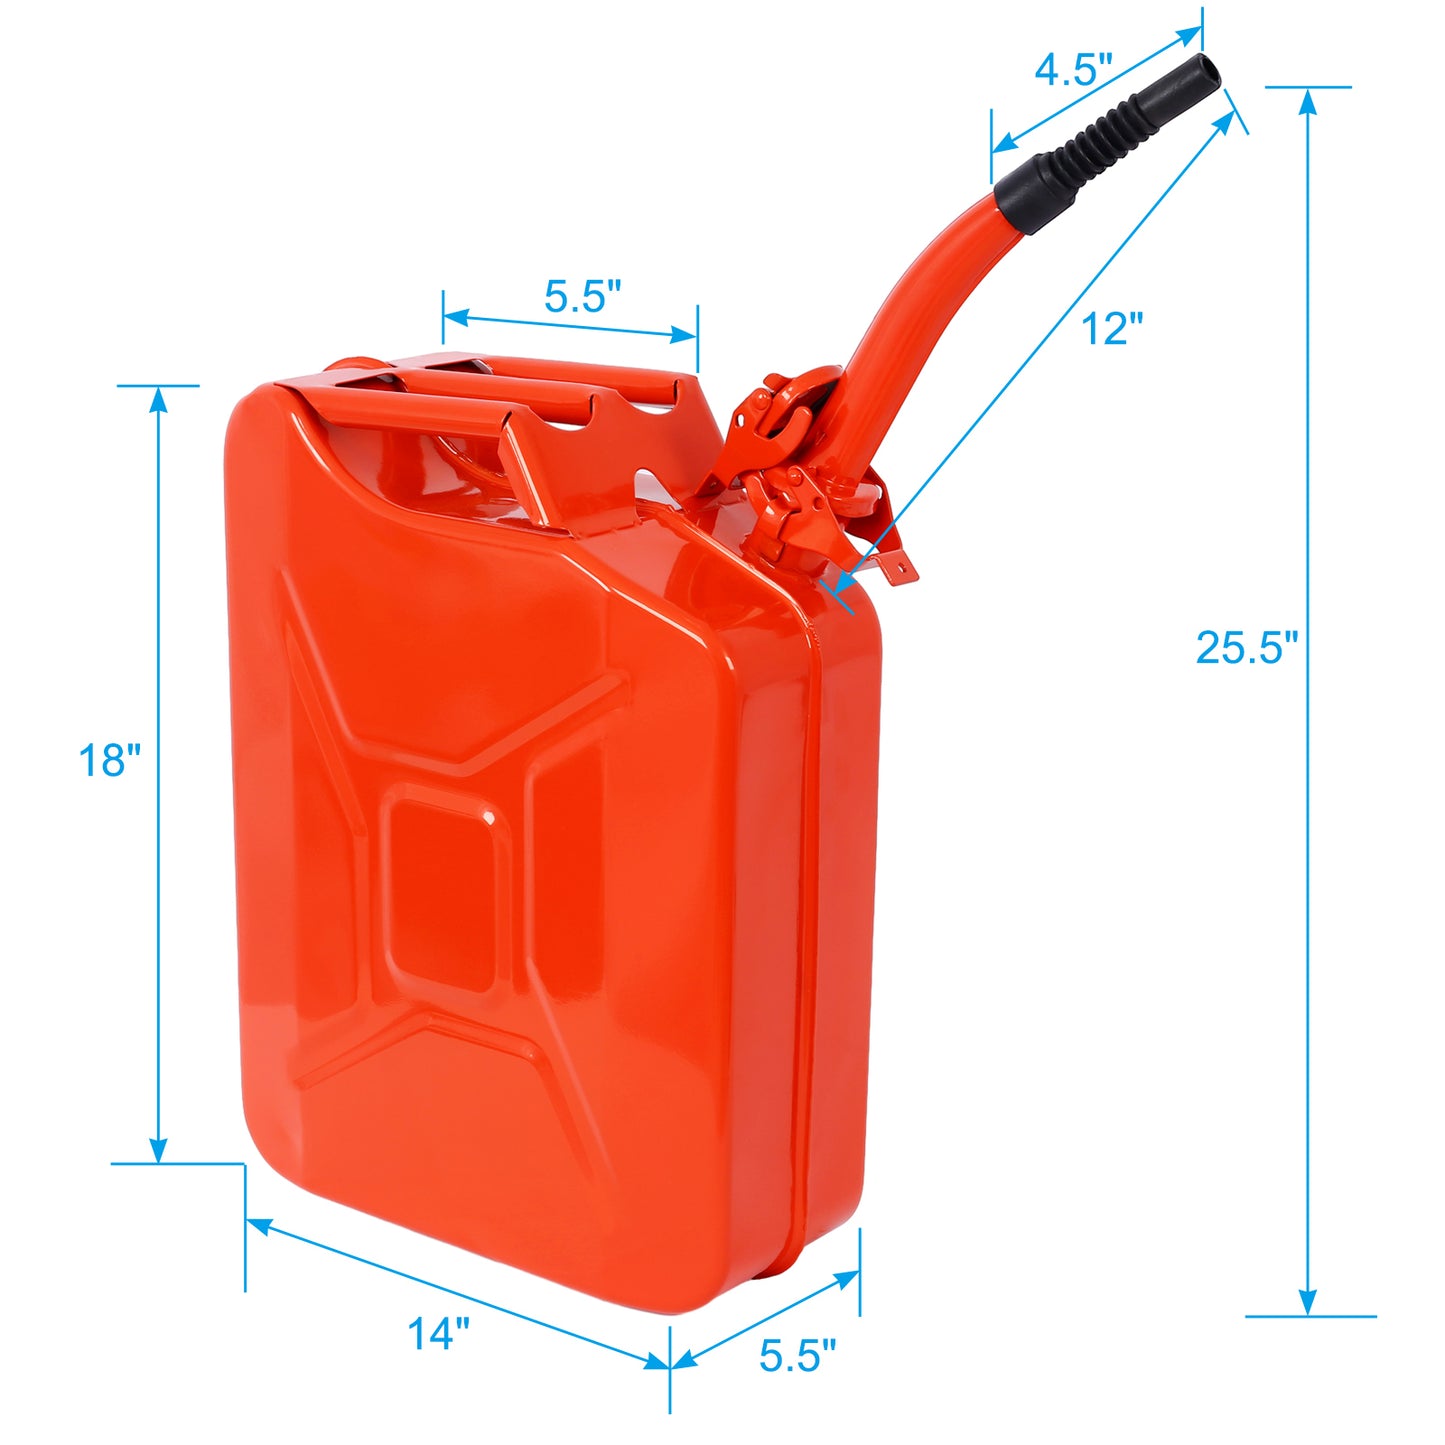 20 Liter (5 Gallon) Jerry Fuel Can with Flexible Spout, Portable Jerry Cans Fuel Tank Steel Fuel Can, Fuels Gasoline Cars, Trucks, Equipment,  RED 3pcs/set